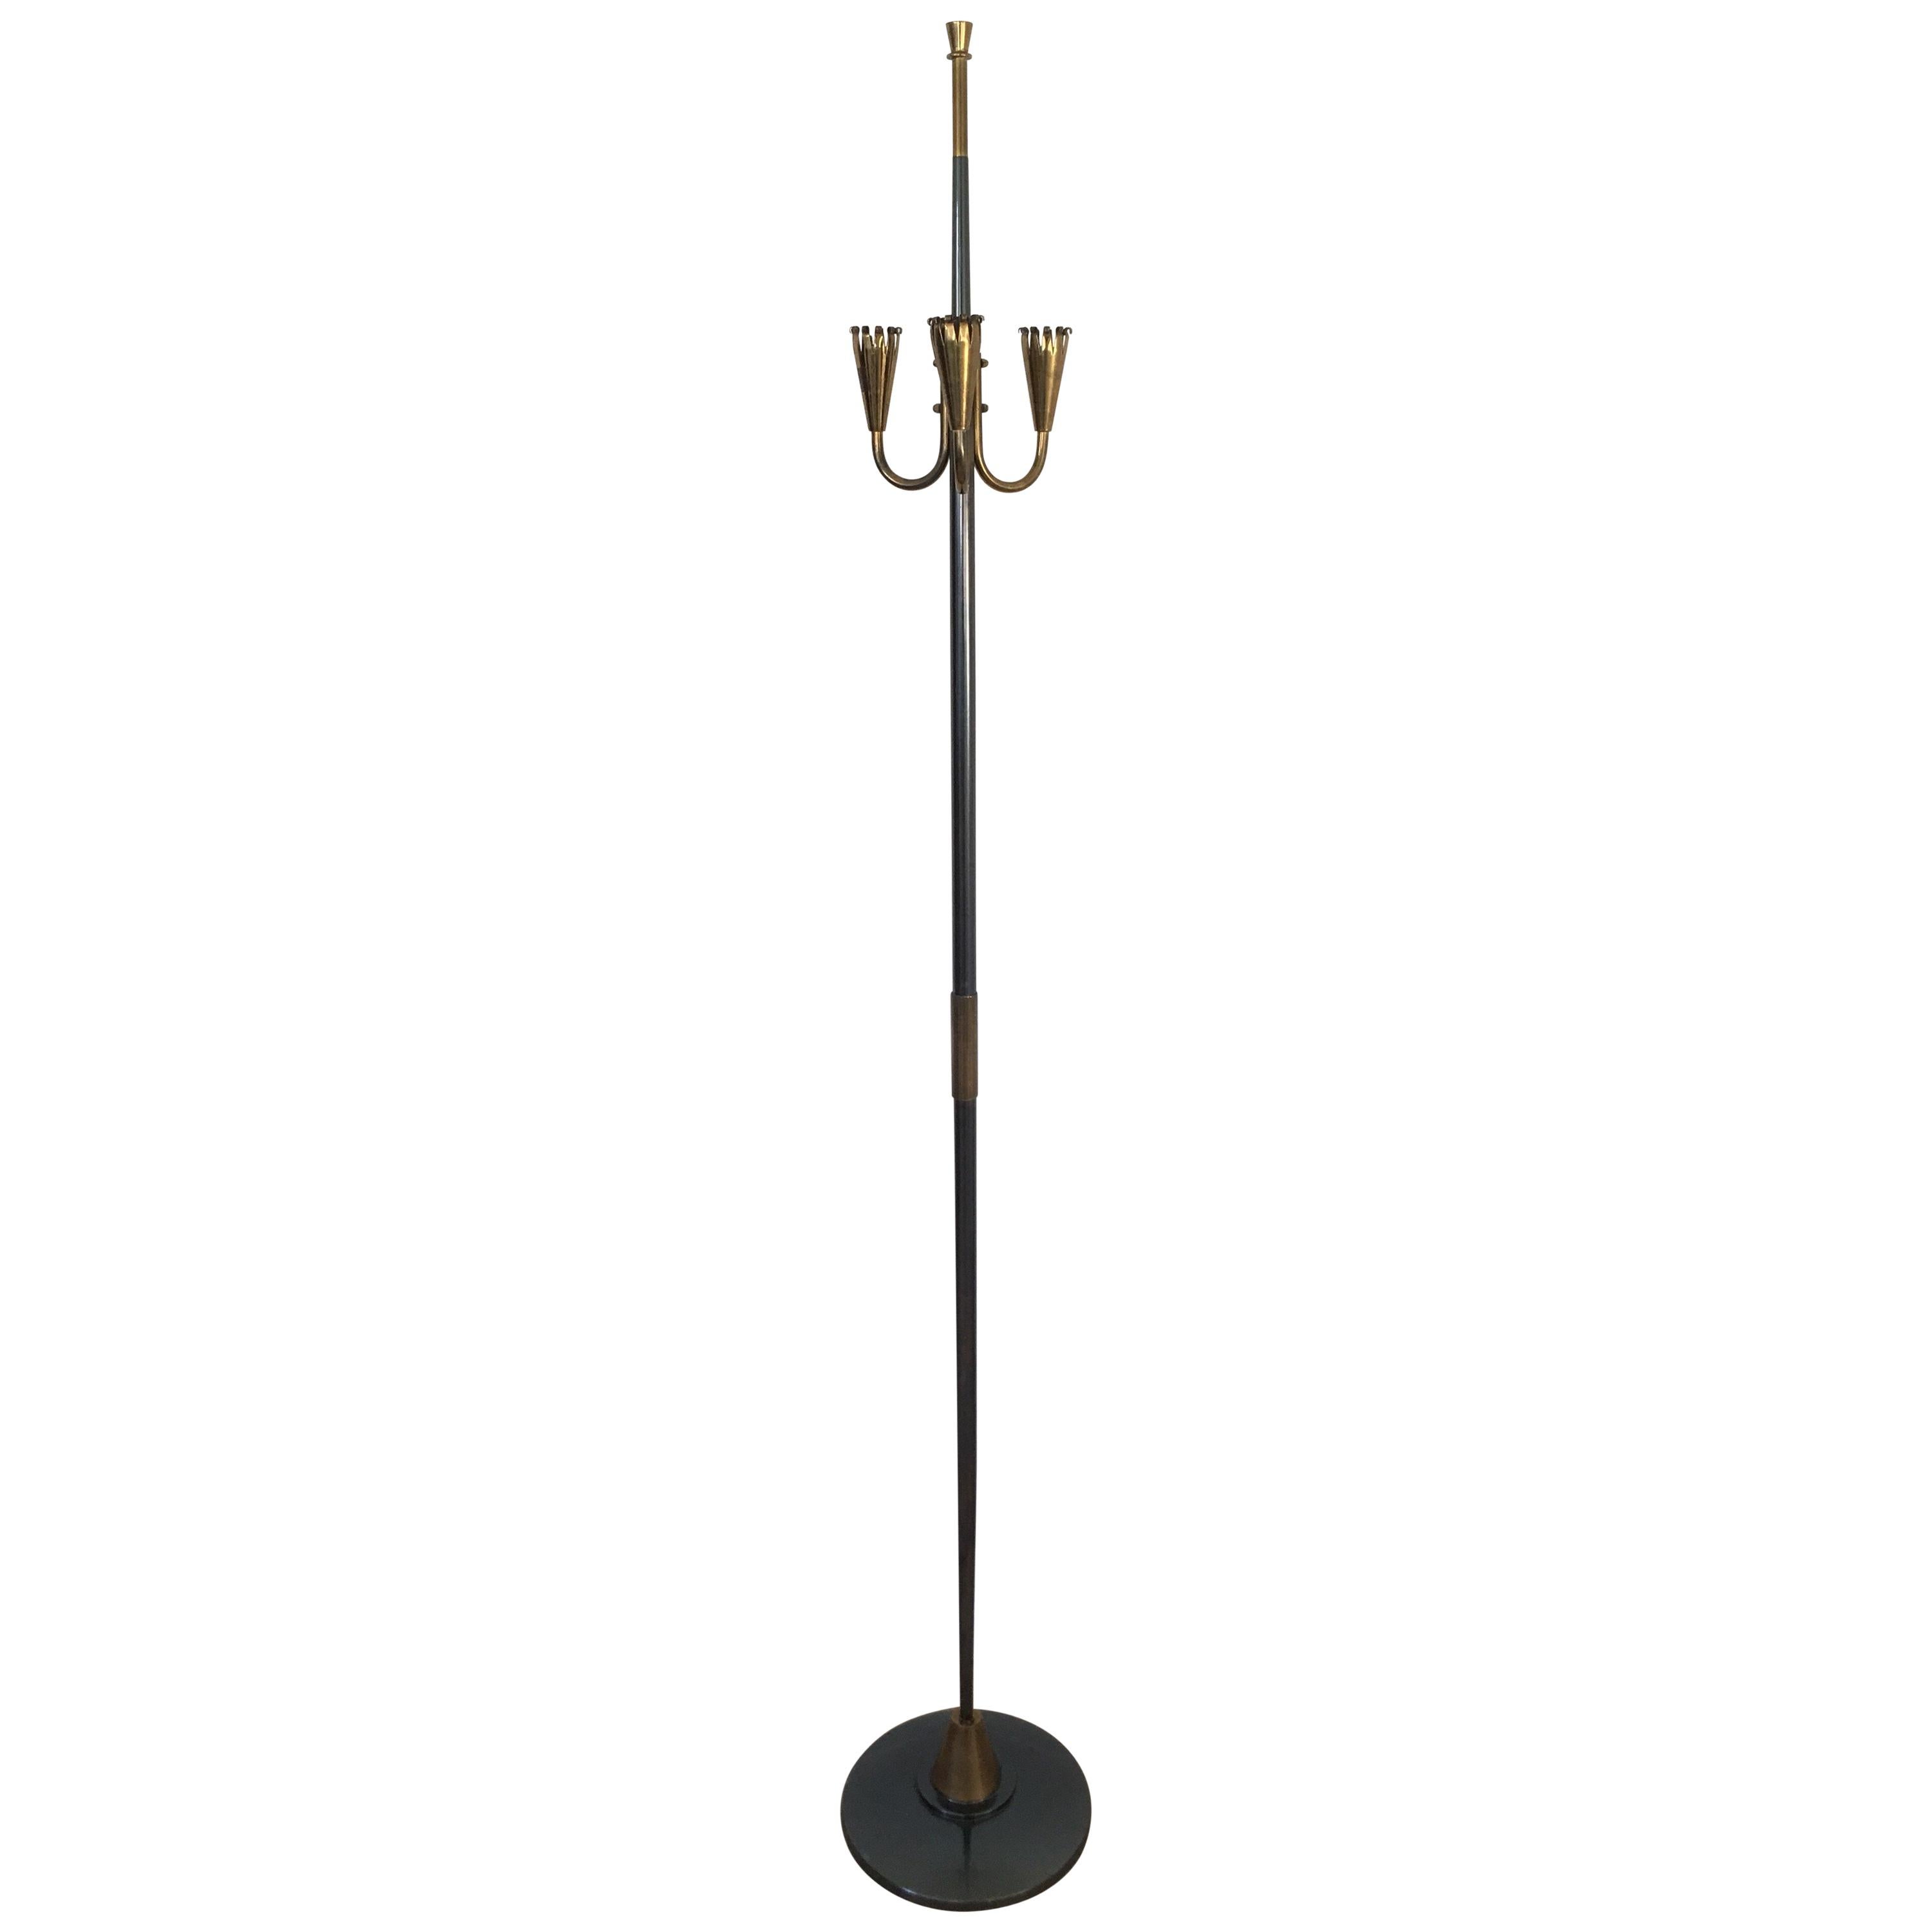 Maison Lunel Gun Metal and Gilt Bronze Patinas Metal Floor Lamp, French, 1950s For Sale